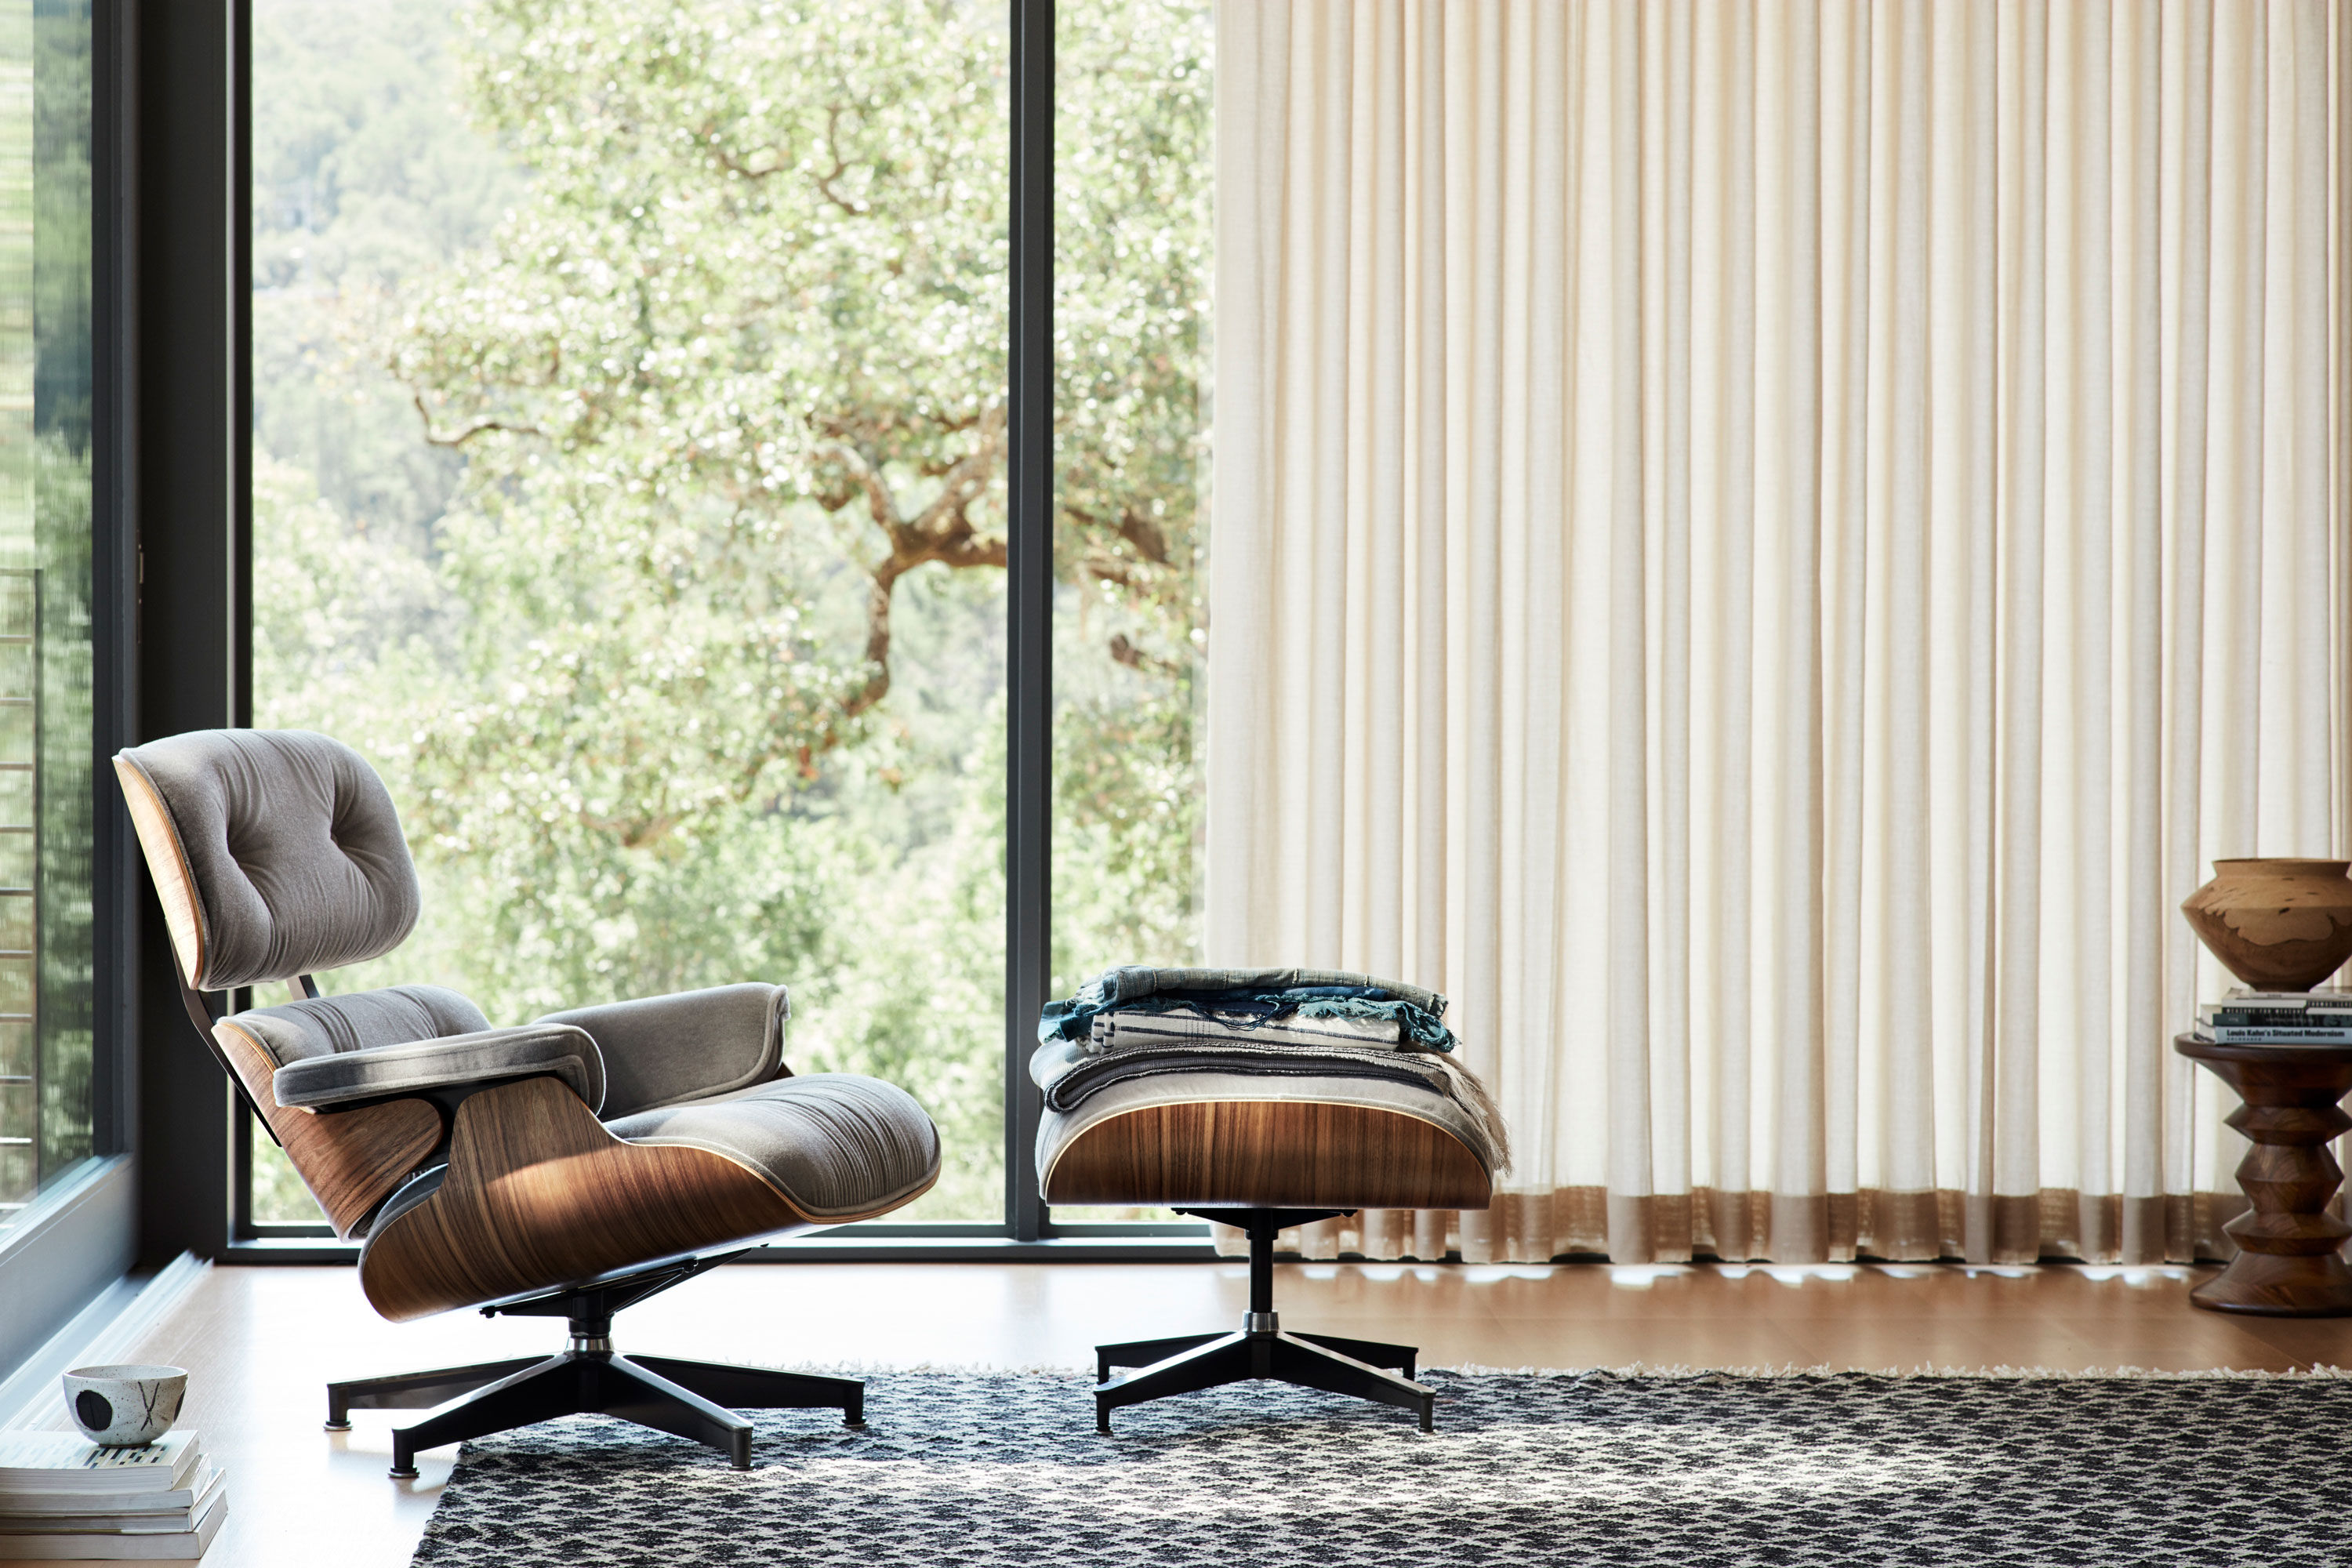 History behind the hype: The Eames Lounge Chair